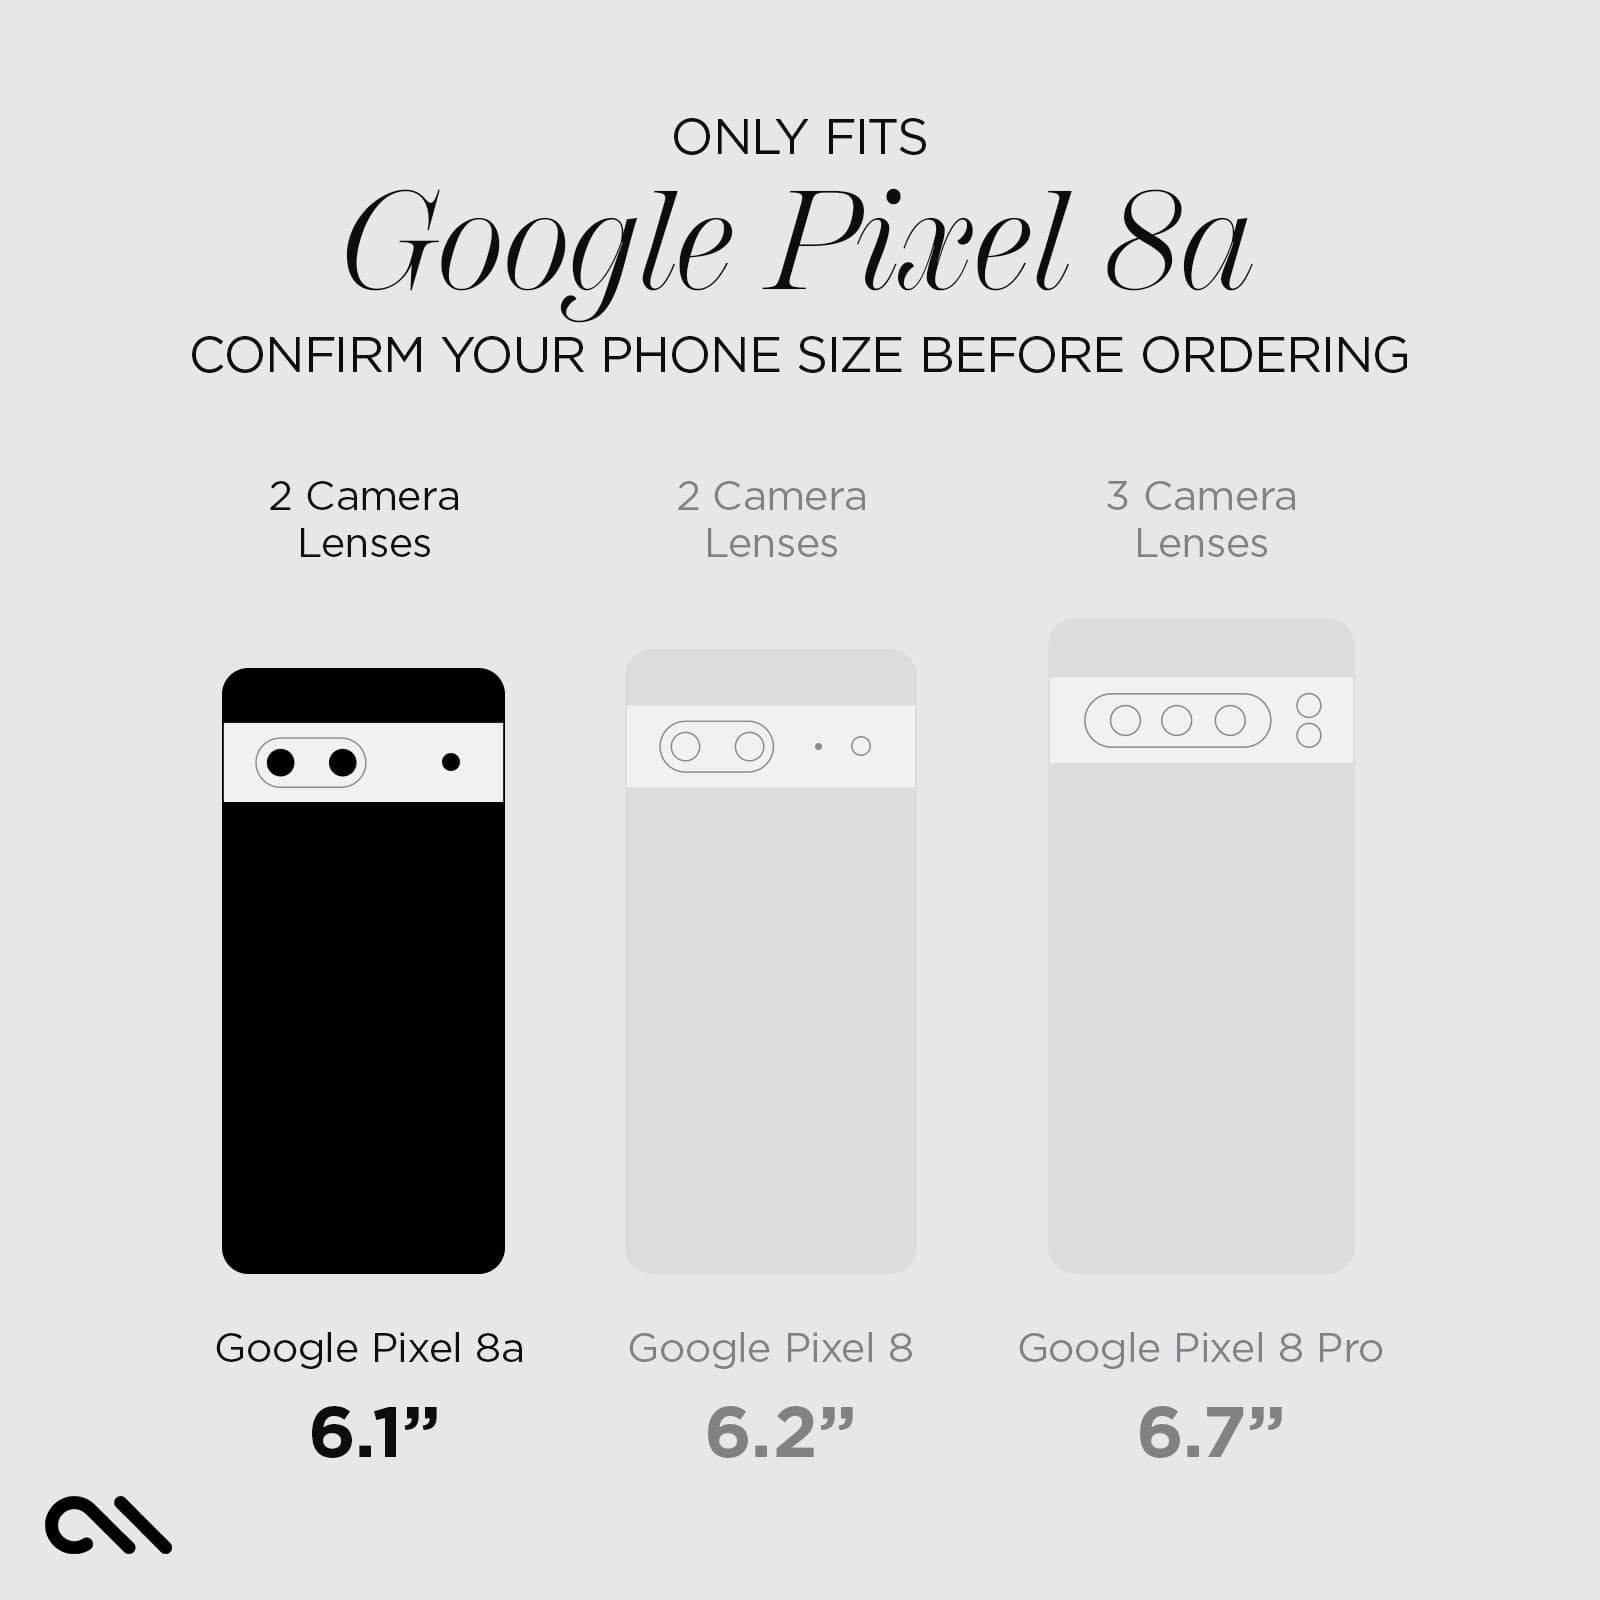 only fits google pixel 8a. confirm your phone size before ordering